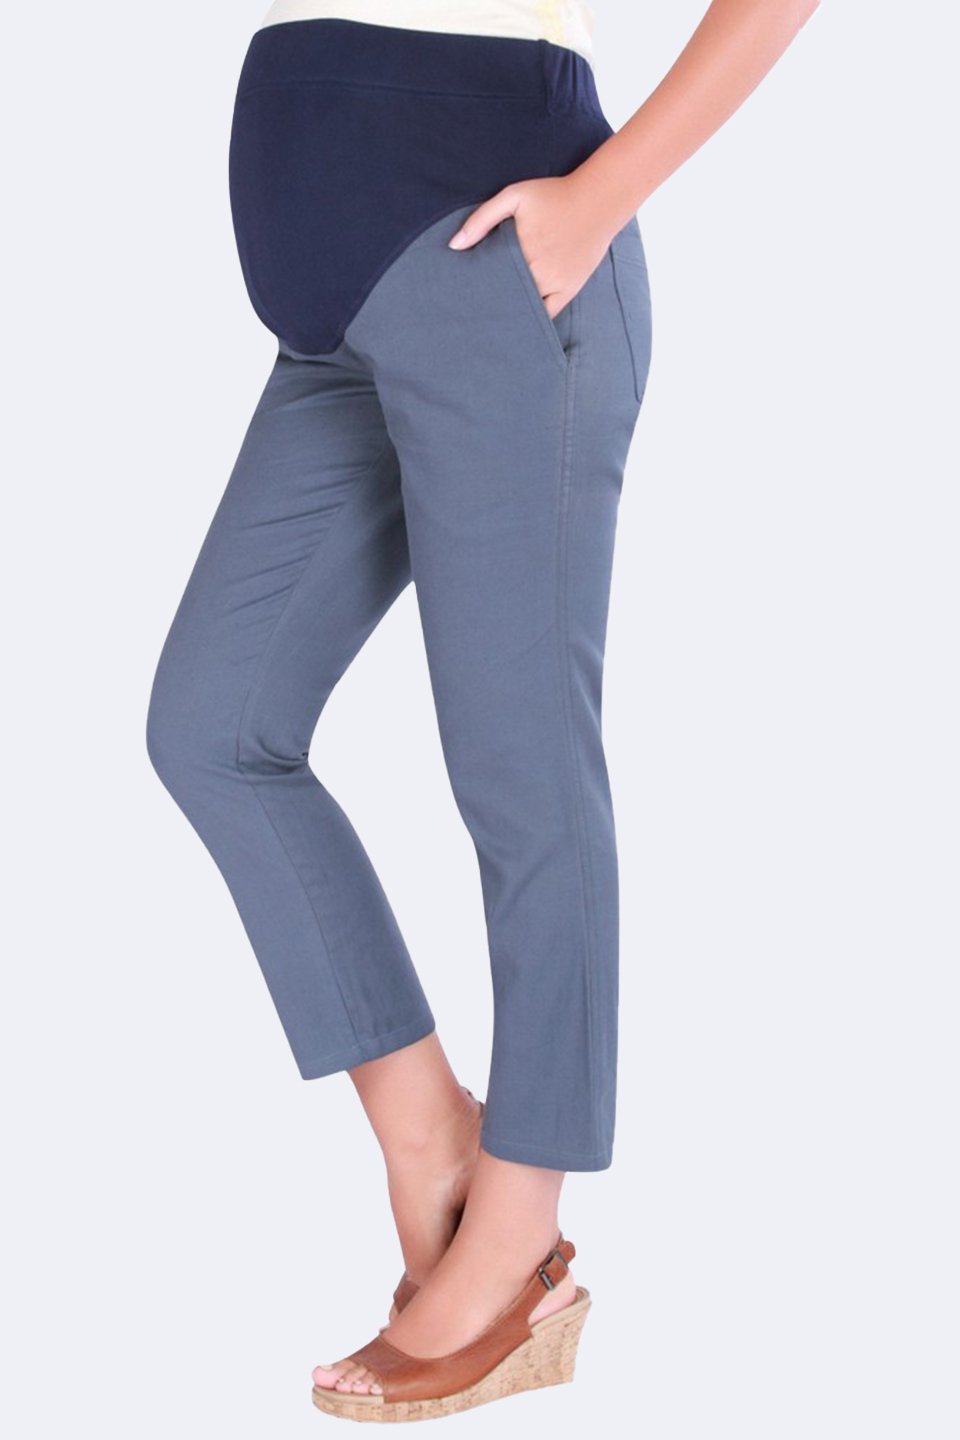 Maternity Trousers Navy  Easy Care Garment  Simon Jersey